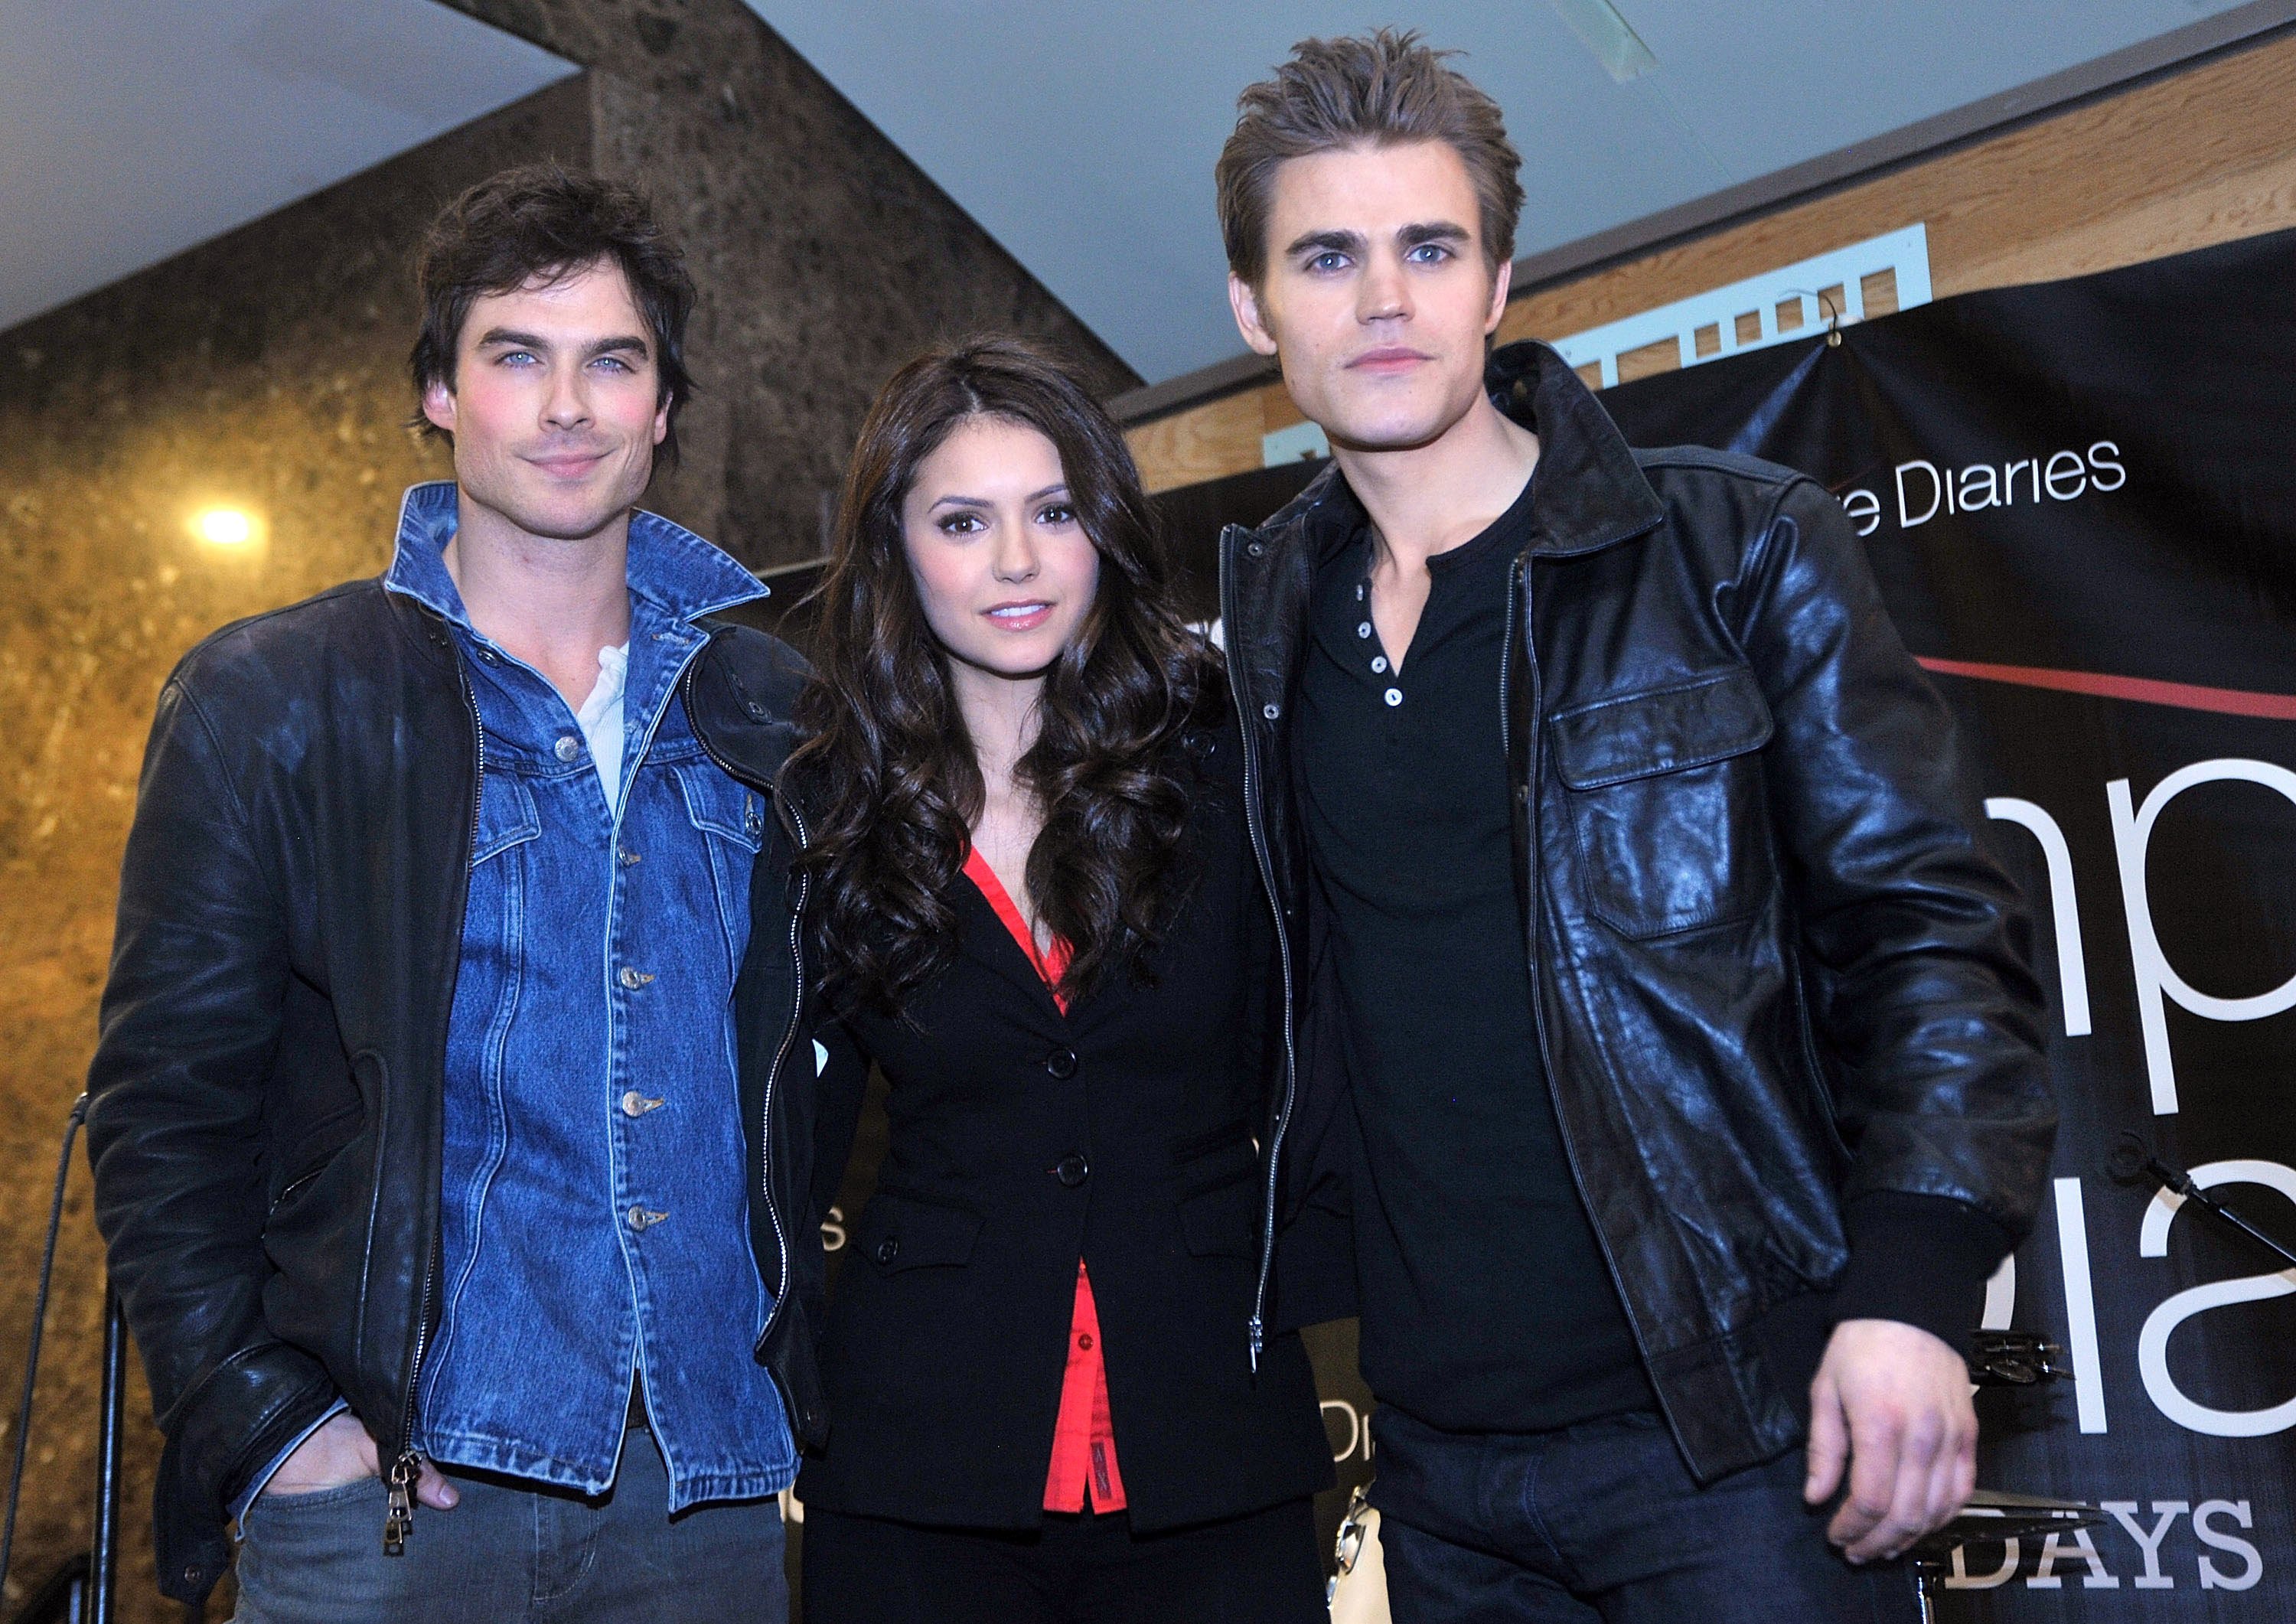 Ian Somerhalder, Nina Dobrev, and Paul Wesley, the cast of 'The Vampire Diaries,' which created two spinoffs, 'The Originals' and 'Legacies,' pose for a picture. Somerhalder wears a black leather jacket over a jean button-up shirt. Dobrev wears a black coat over a red shirt. Wesley wears a black leather jacket over a black shirt.